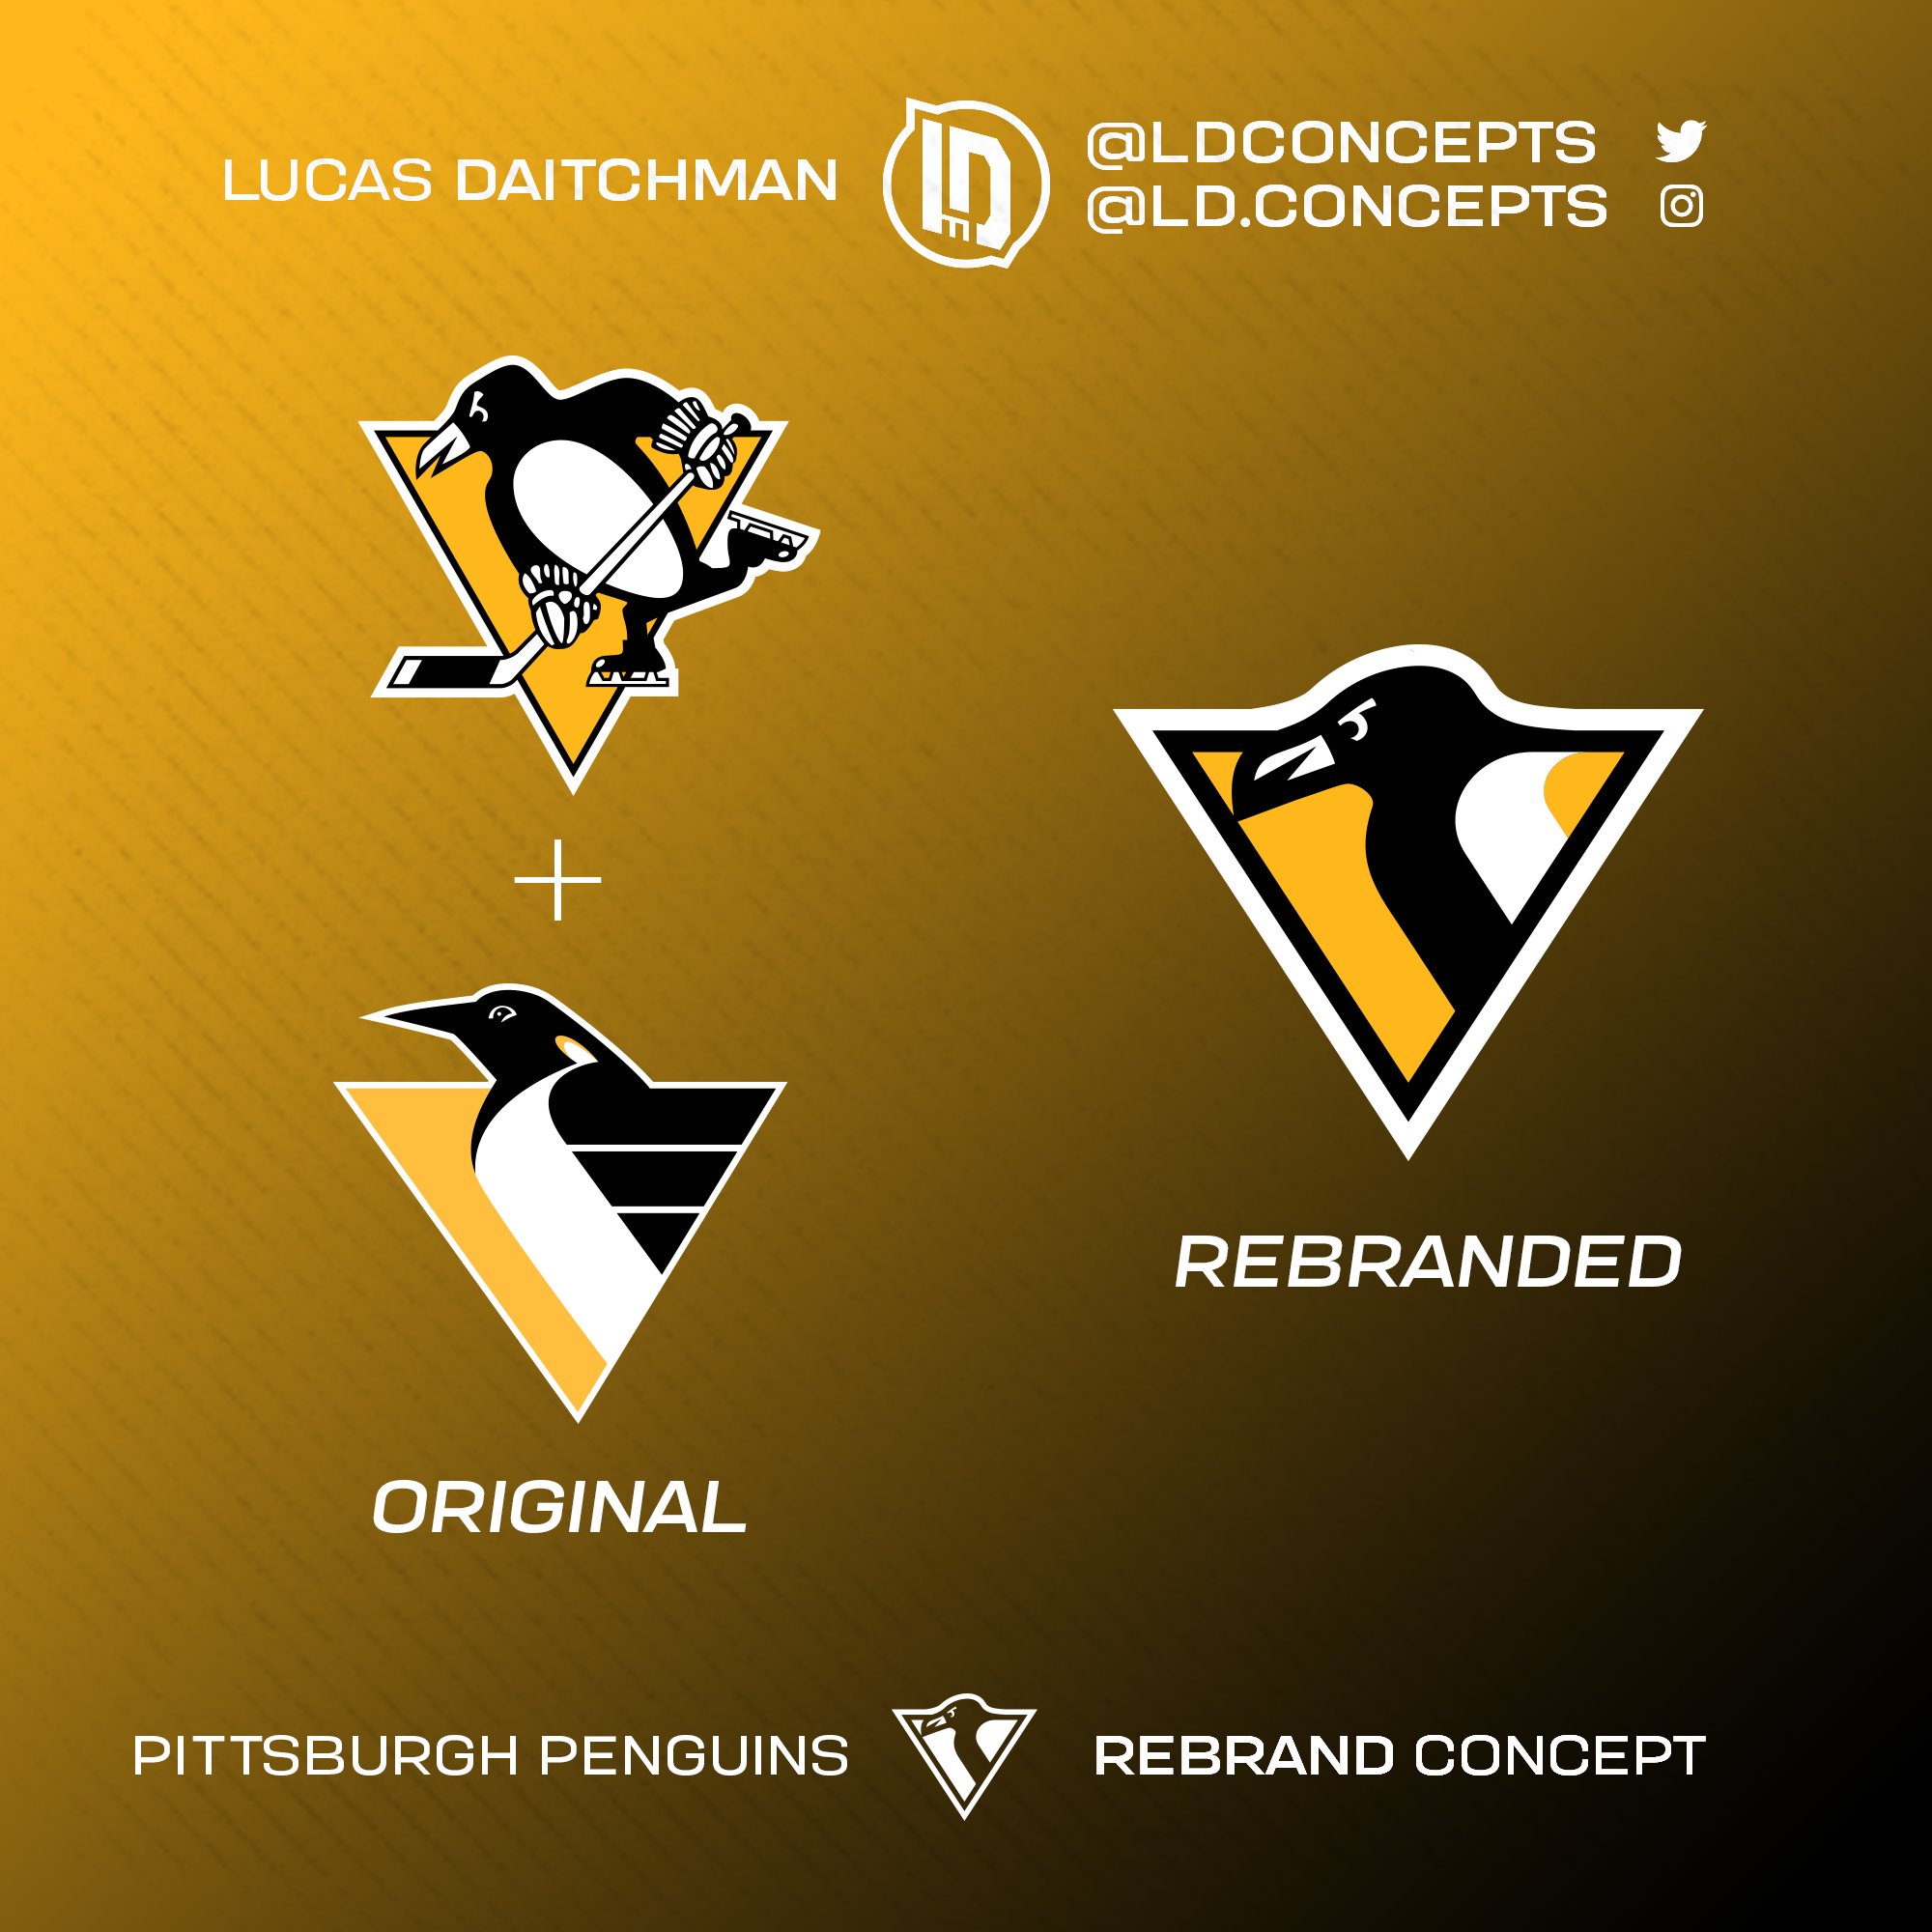 Lucas Daitchman on Twitter: With the #Pens and #Flyers leaks, I